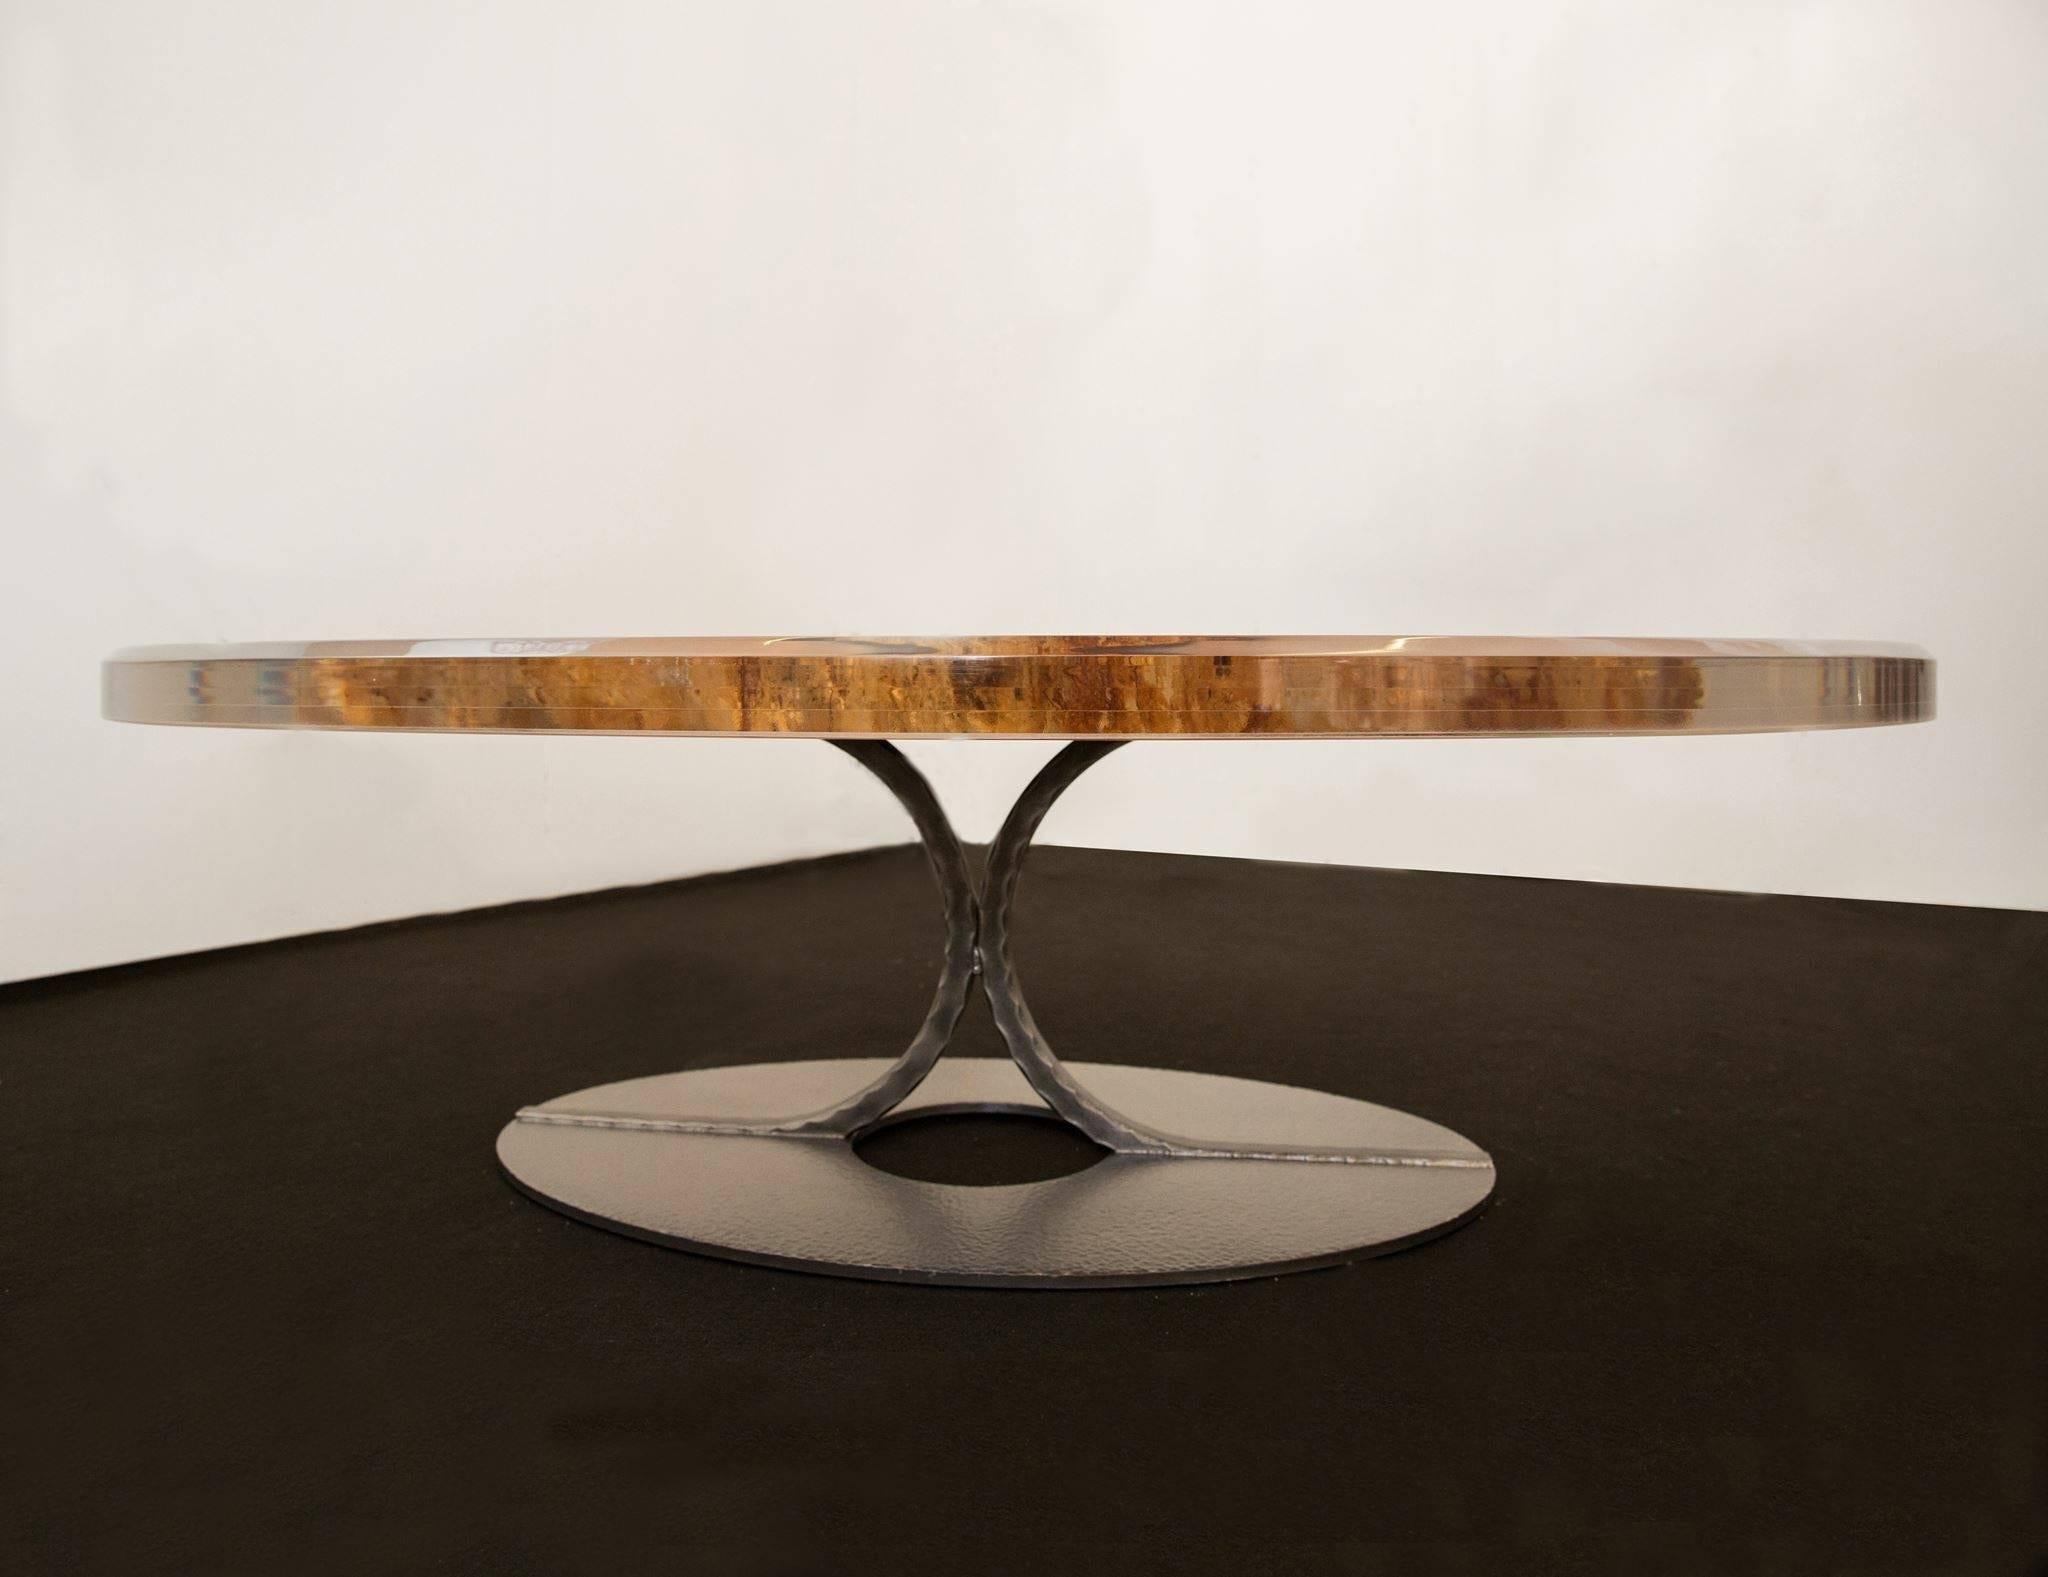 For this unique piece, the designer chose a magnificent slice of centuries-old olive tree trunk (estimated at 300 years), originating in Apulia, which he enhanced by embedding it into a translucent epoxy resin. Then, he added his personal touch with